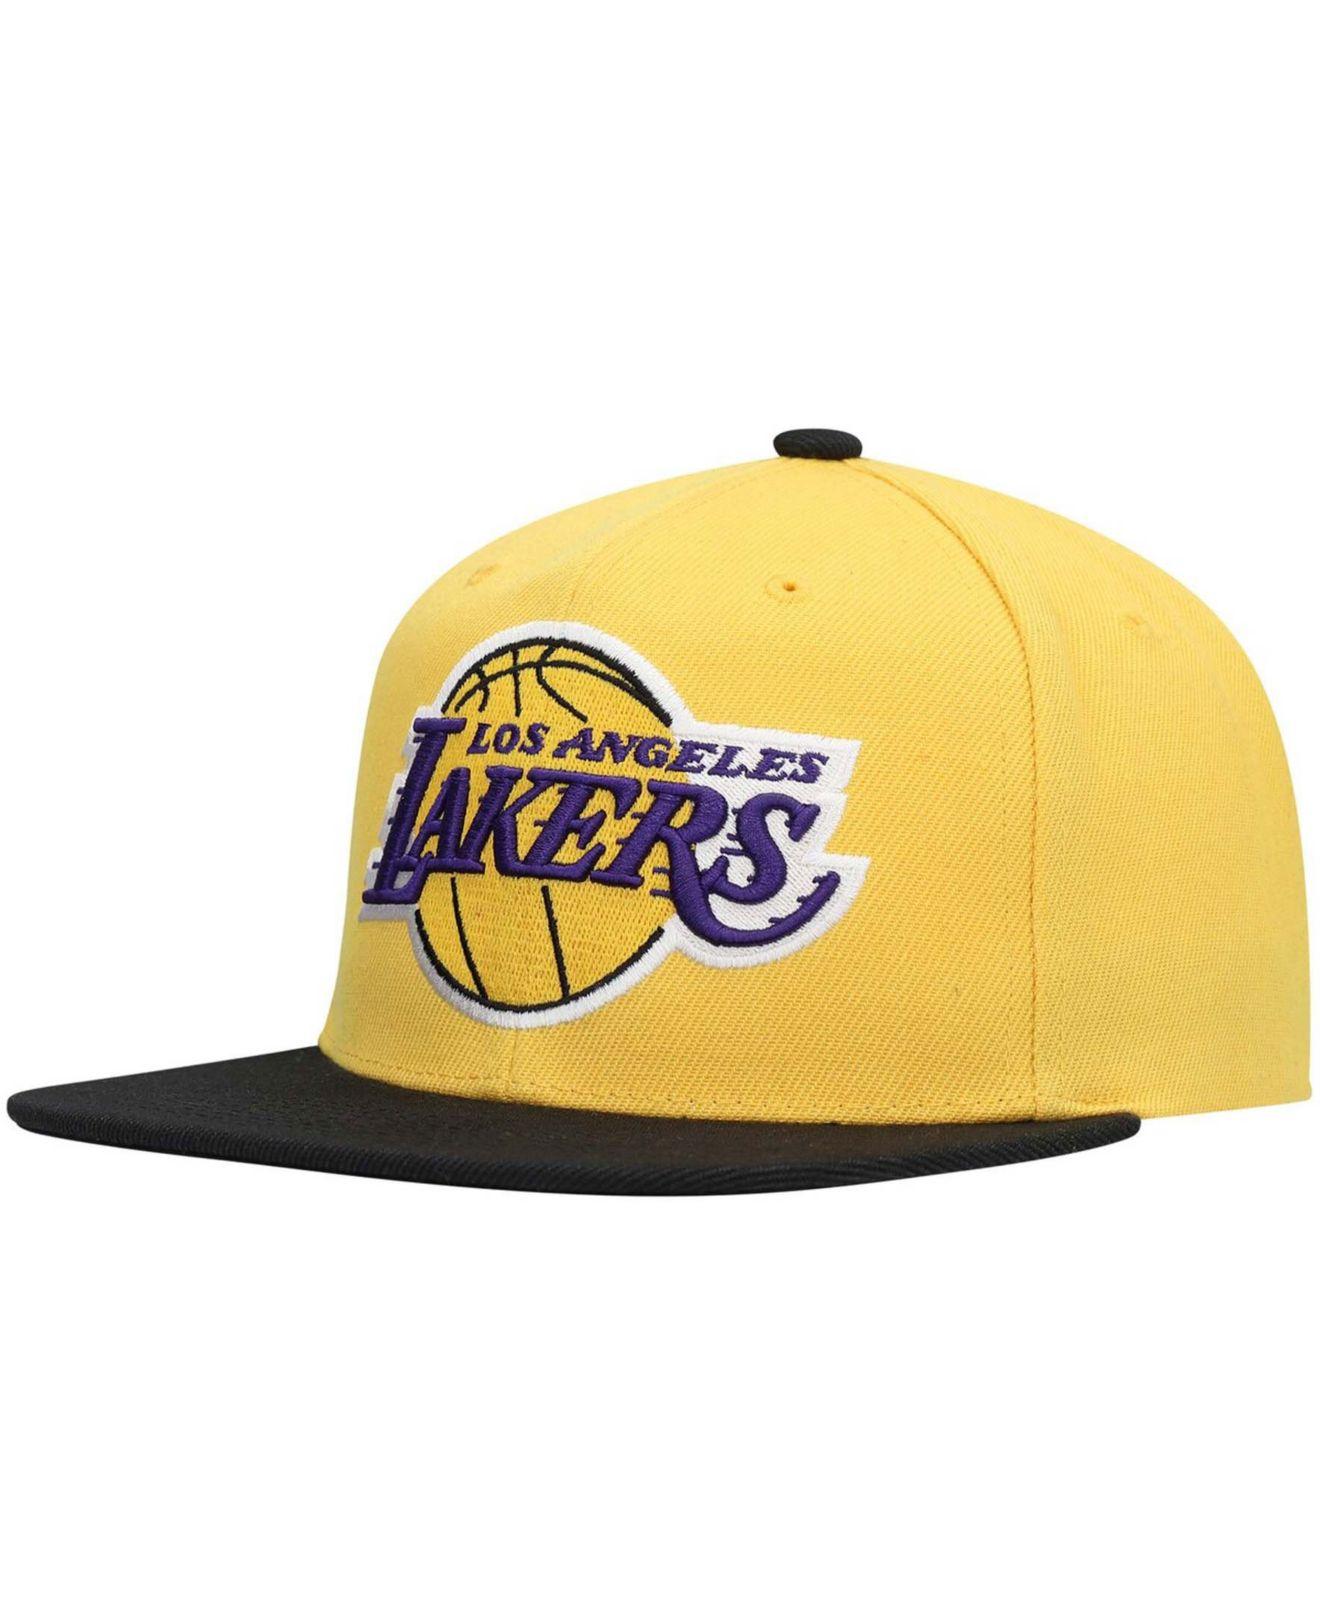 Men's Mitchell & Ness Purple/Gold Los Angeles Lakers Hardwood Classics  Two-Tone Fitted Hat